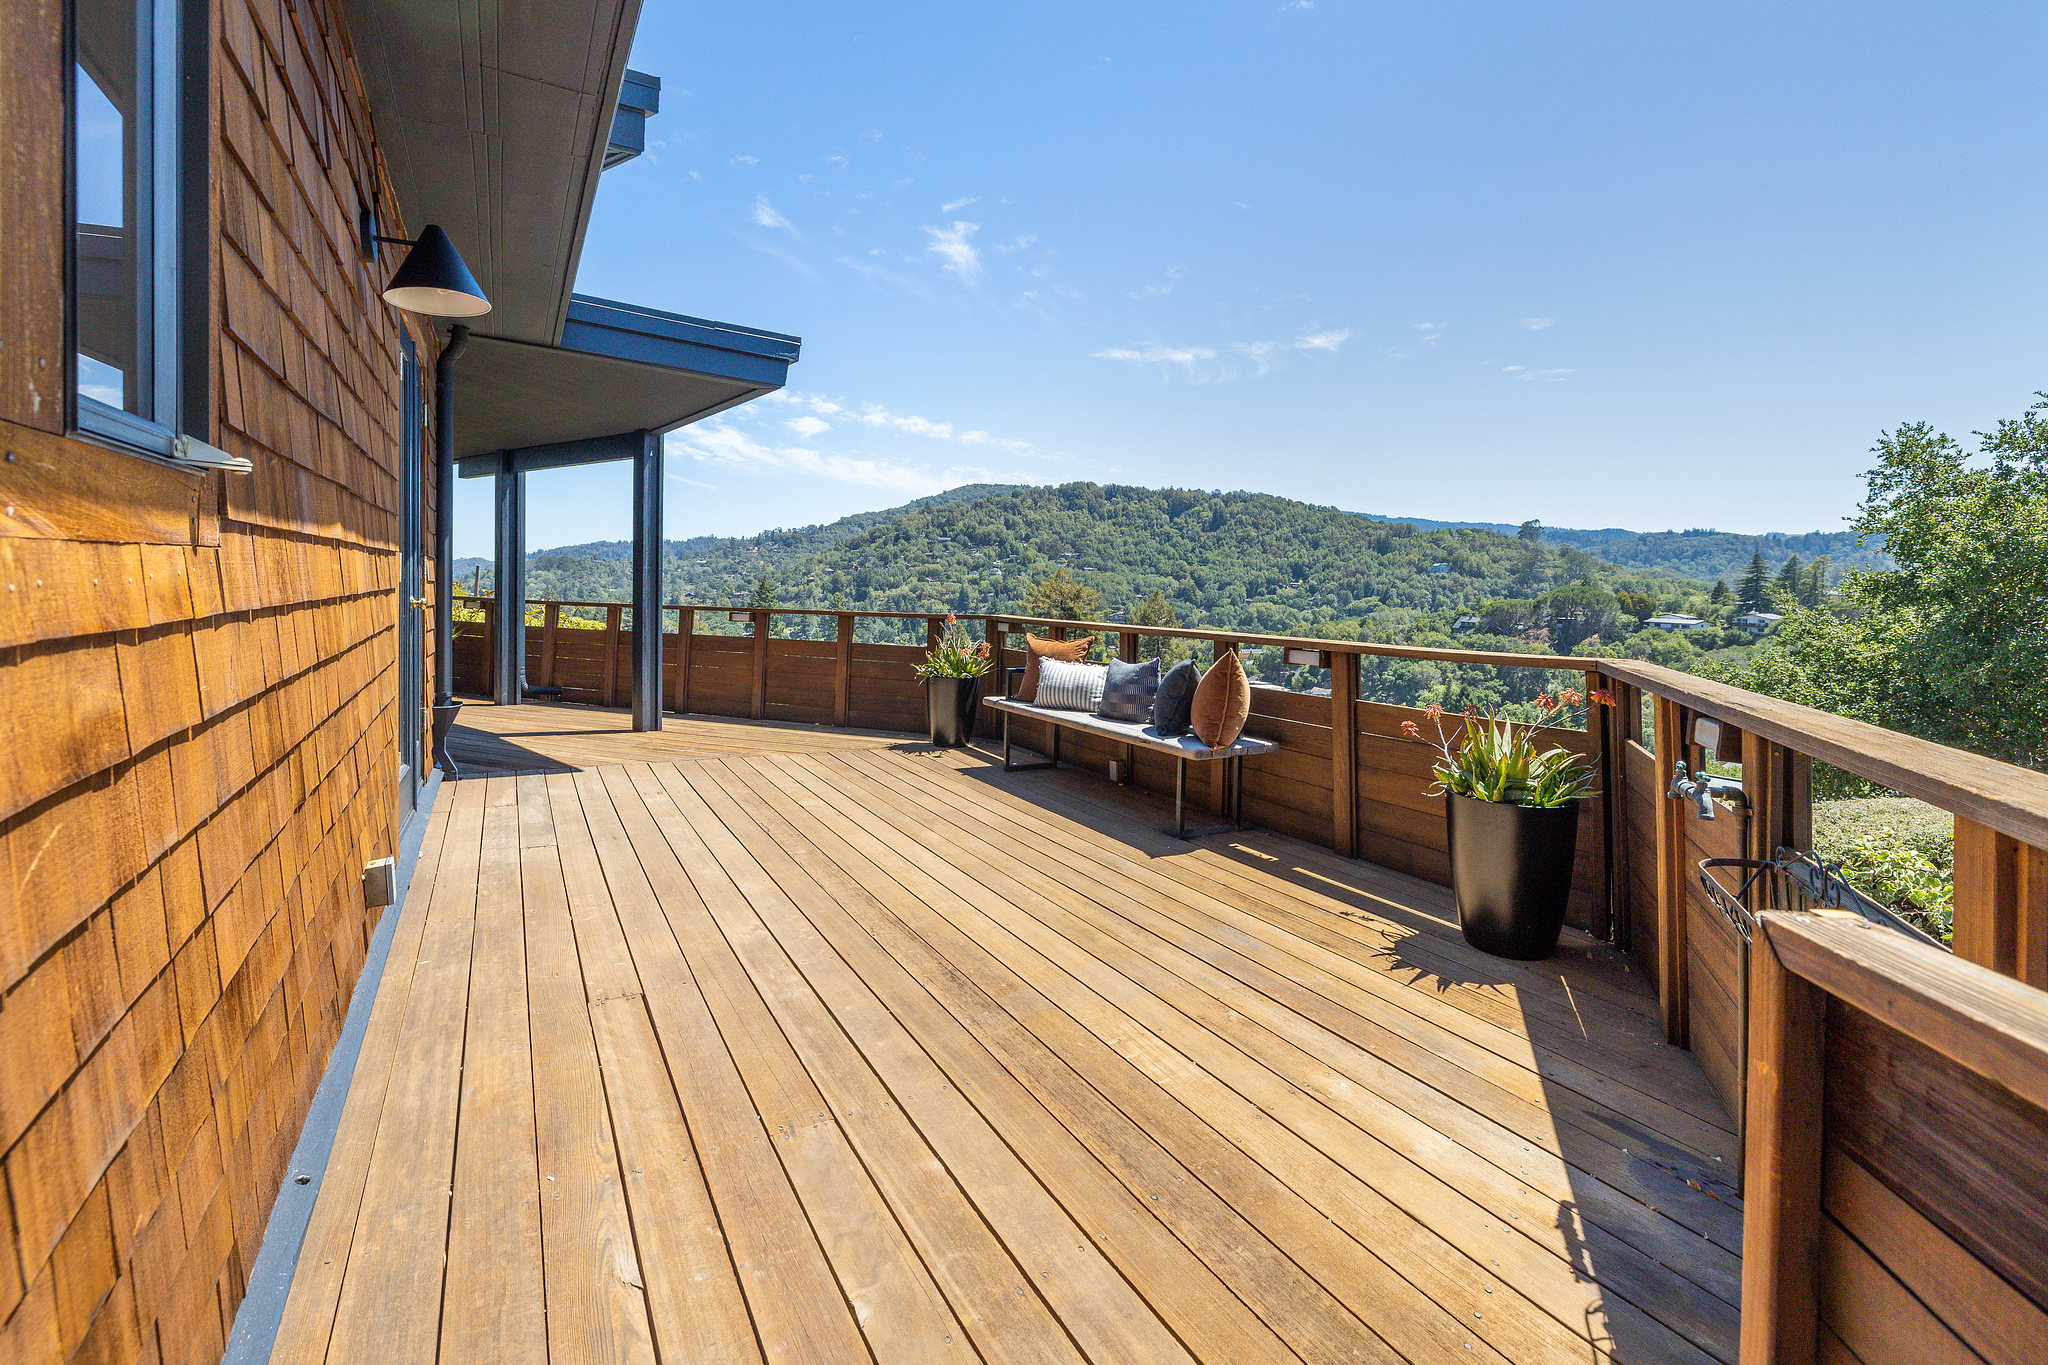 Marin county home showing a wooden deck with views of Mt Tam in the distance